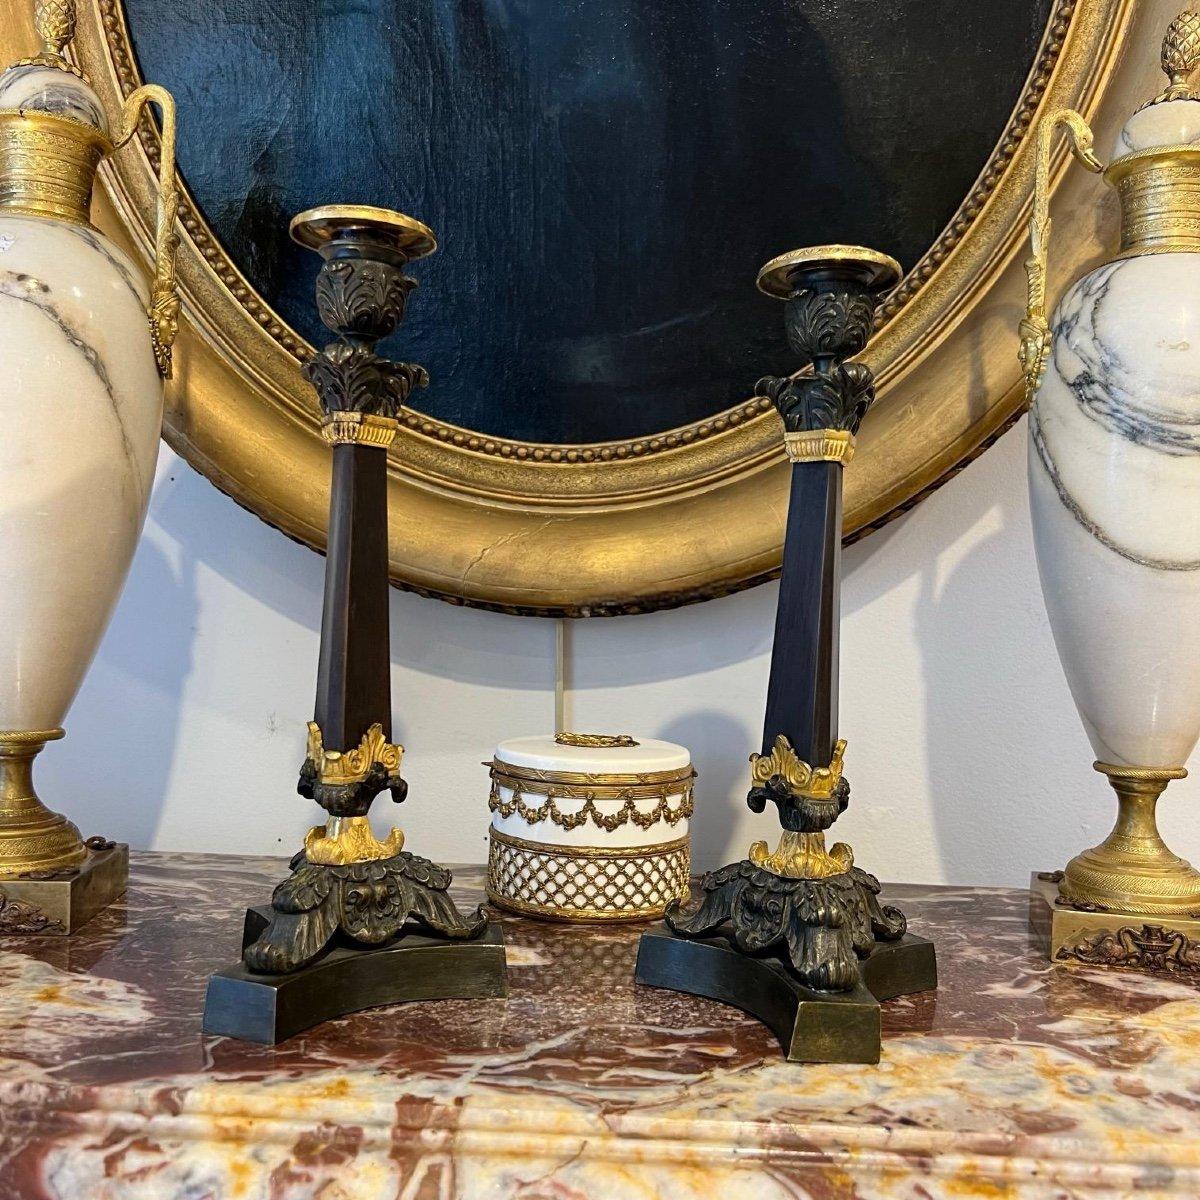 We present you with this rare pair of candlesticks in double patina from the 19th century period of the Bourbon Restoration in France. The brown-patinated stem with a three-sided chamfer at the top adds a distinctive touch to the shape of each